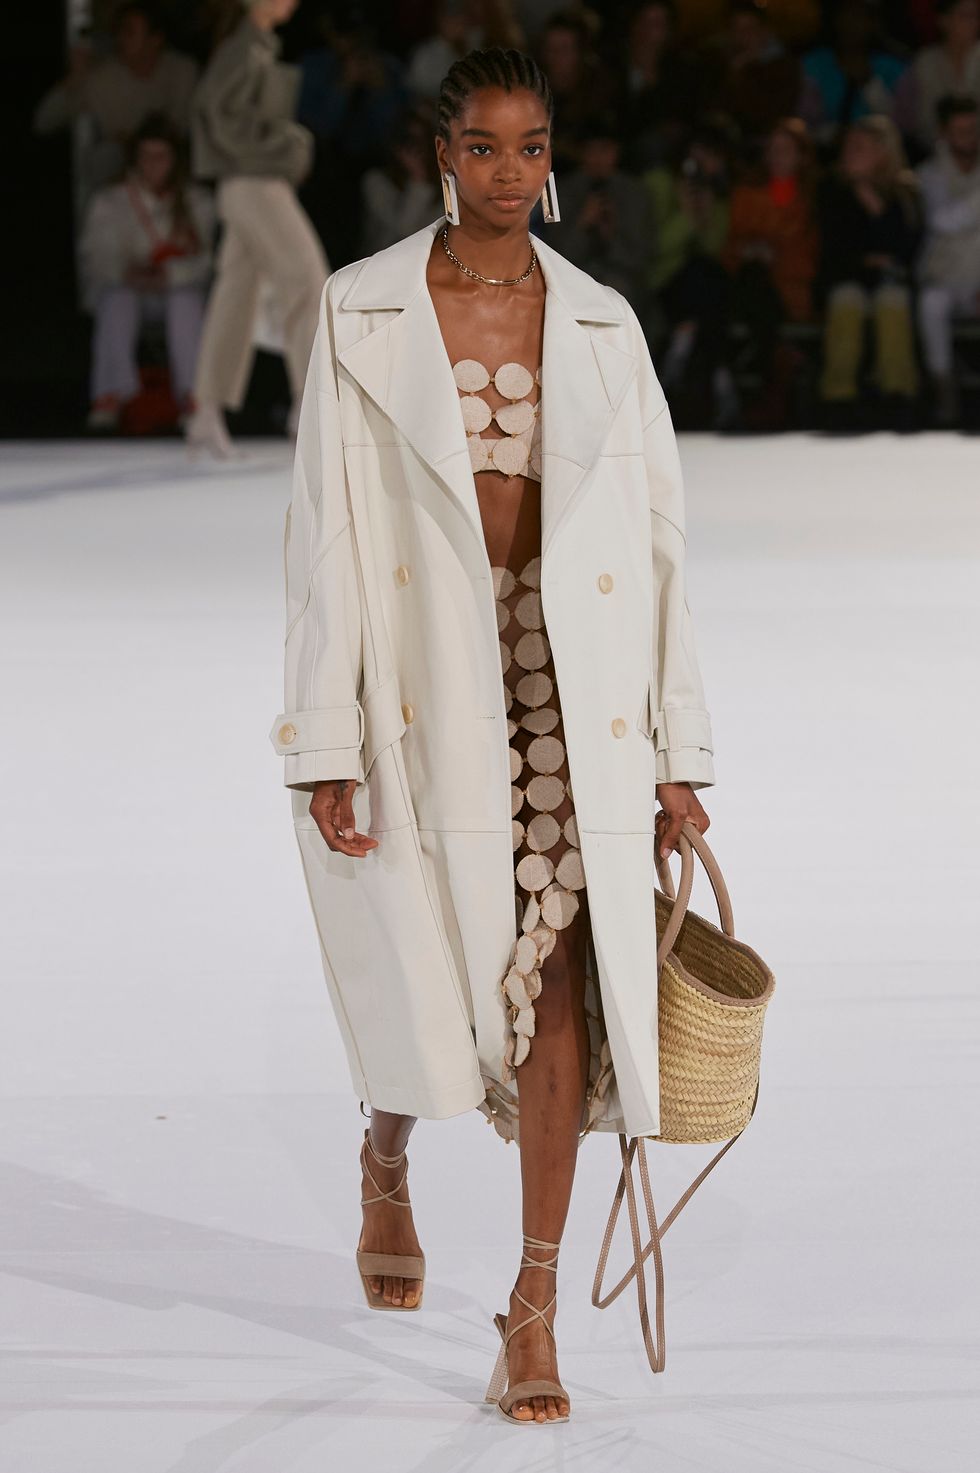 L'ANNÉE 97 + @jacquemus F/W 2020/21 Wearing these clothes, you can